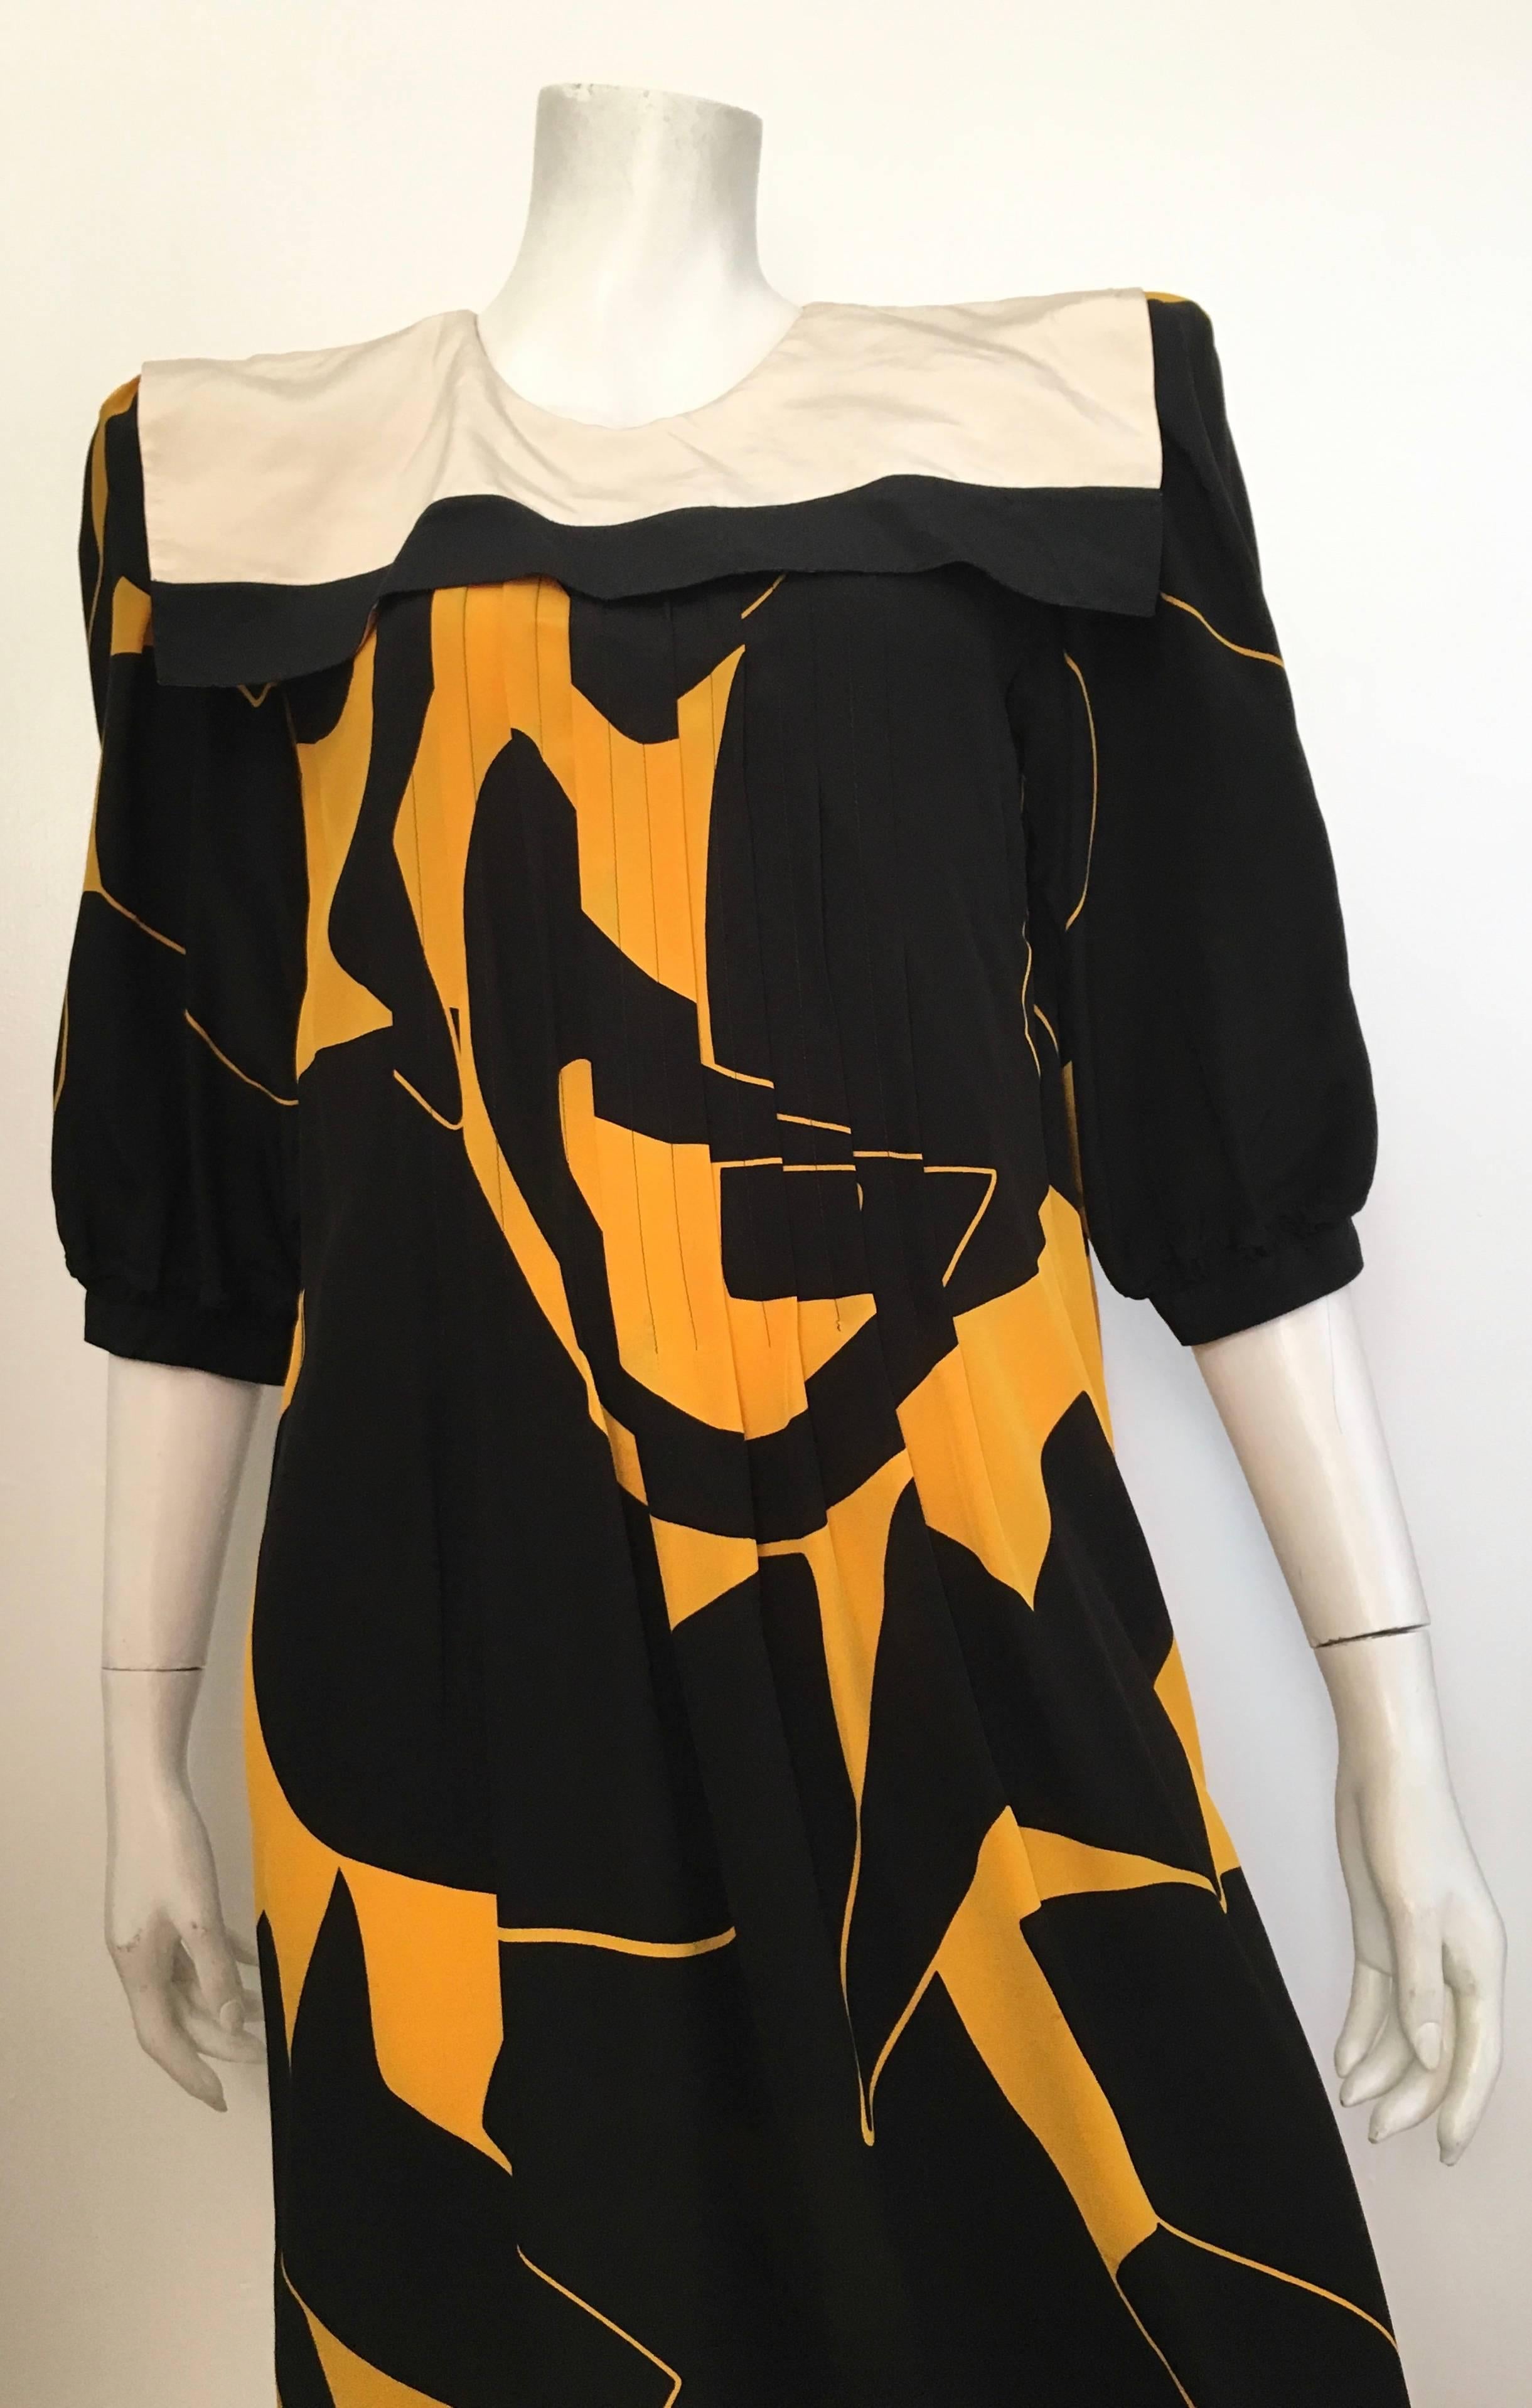 Flora Kung Advance silk with fantastic abstract pattern design dress with sailor collar is a size 10. Gorgeous pattern that is perfect for an art opening or dinner at The Four Seasons. Shoulder pads that can be removed is so desired.
Measurements